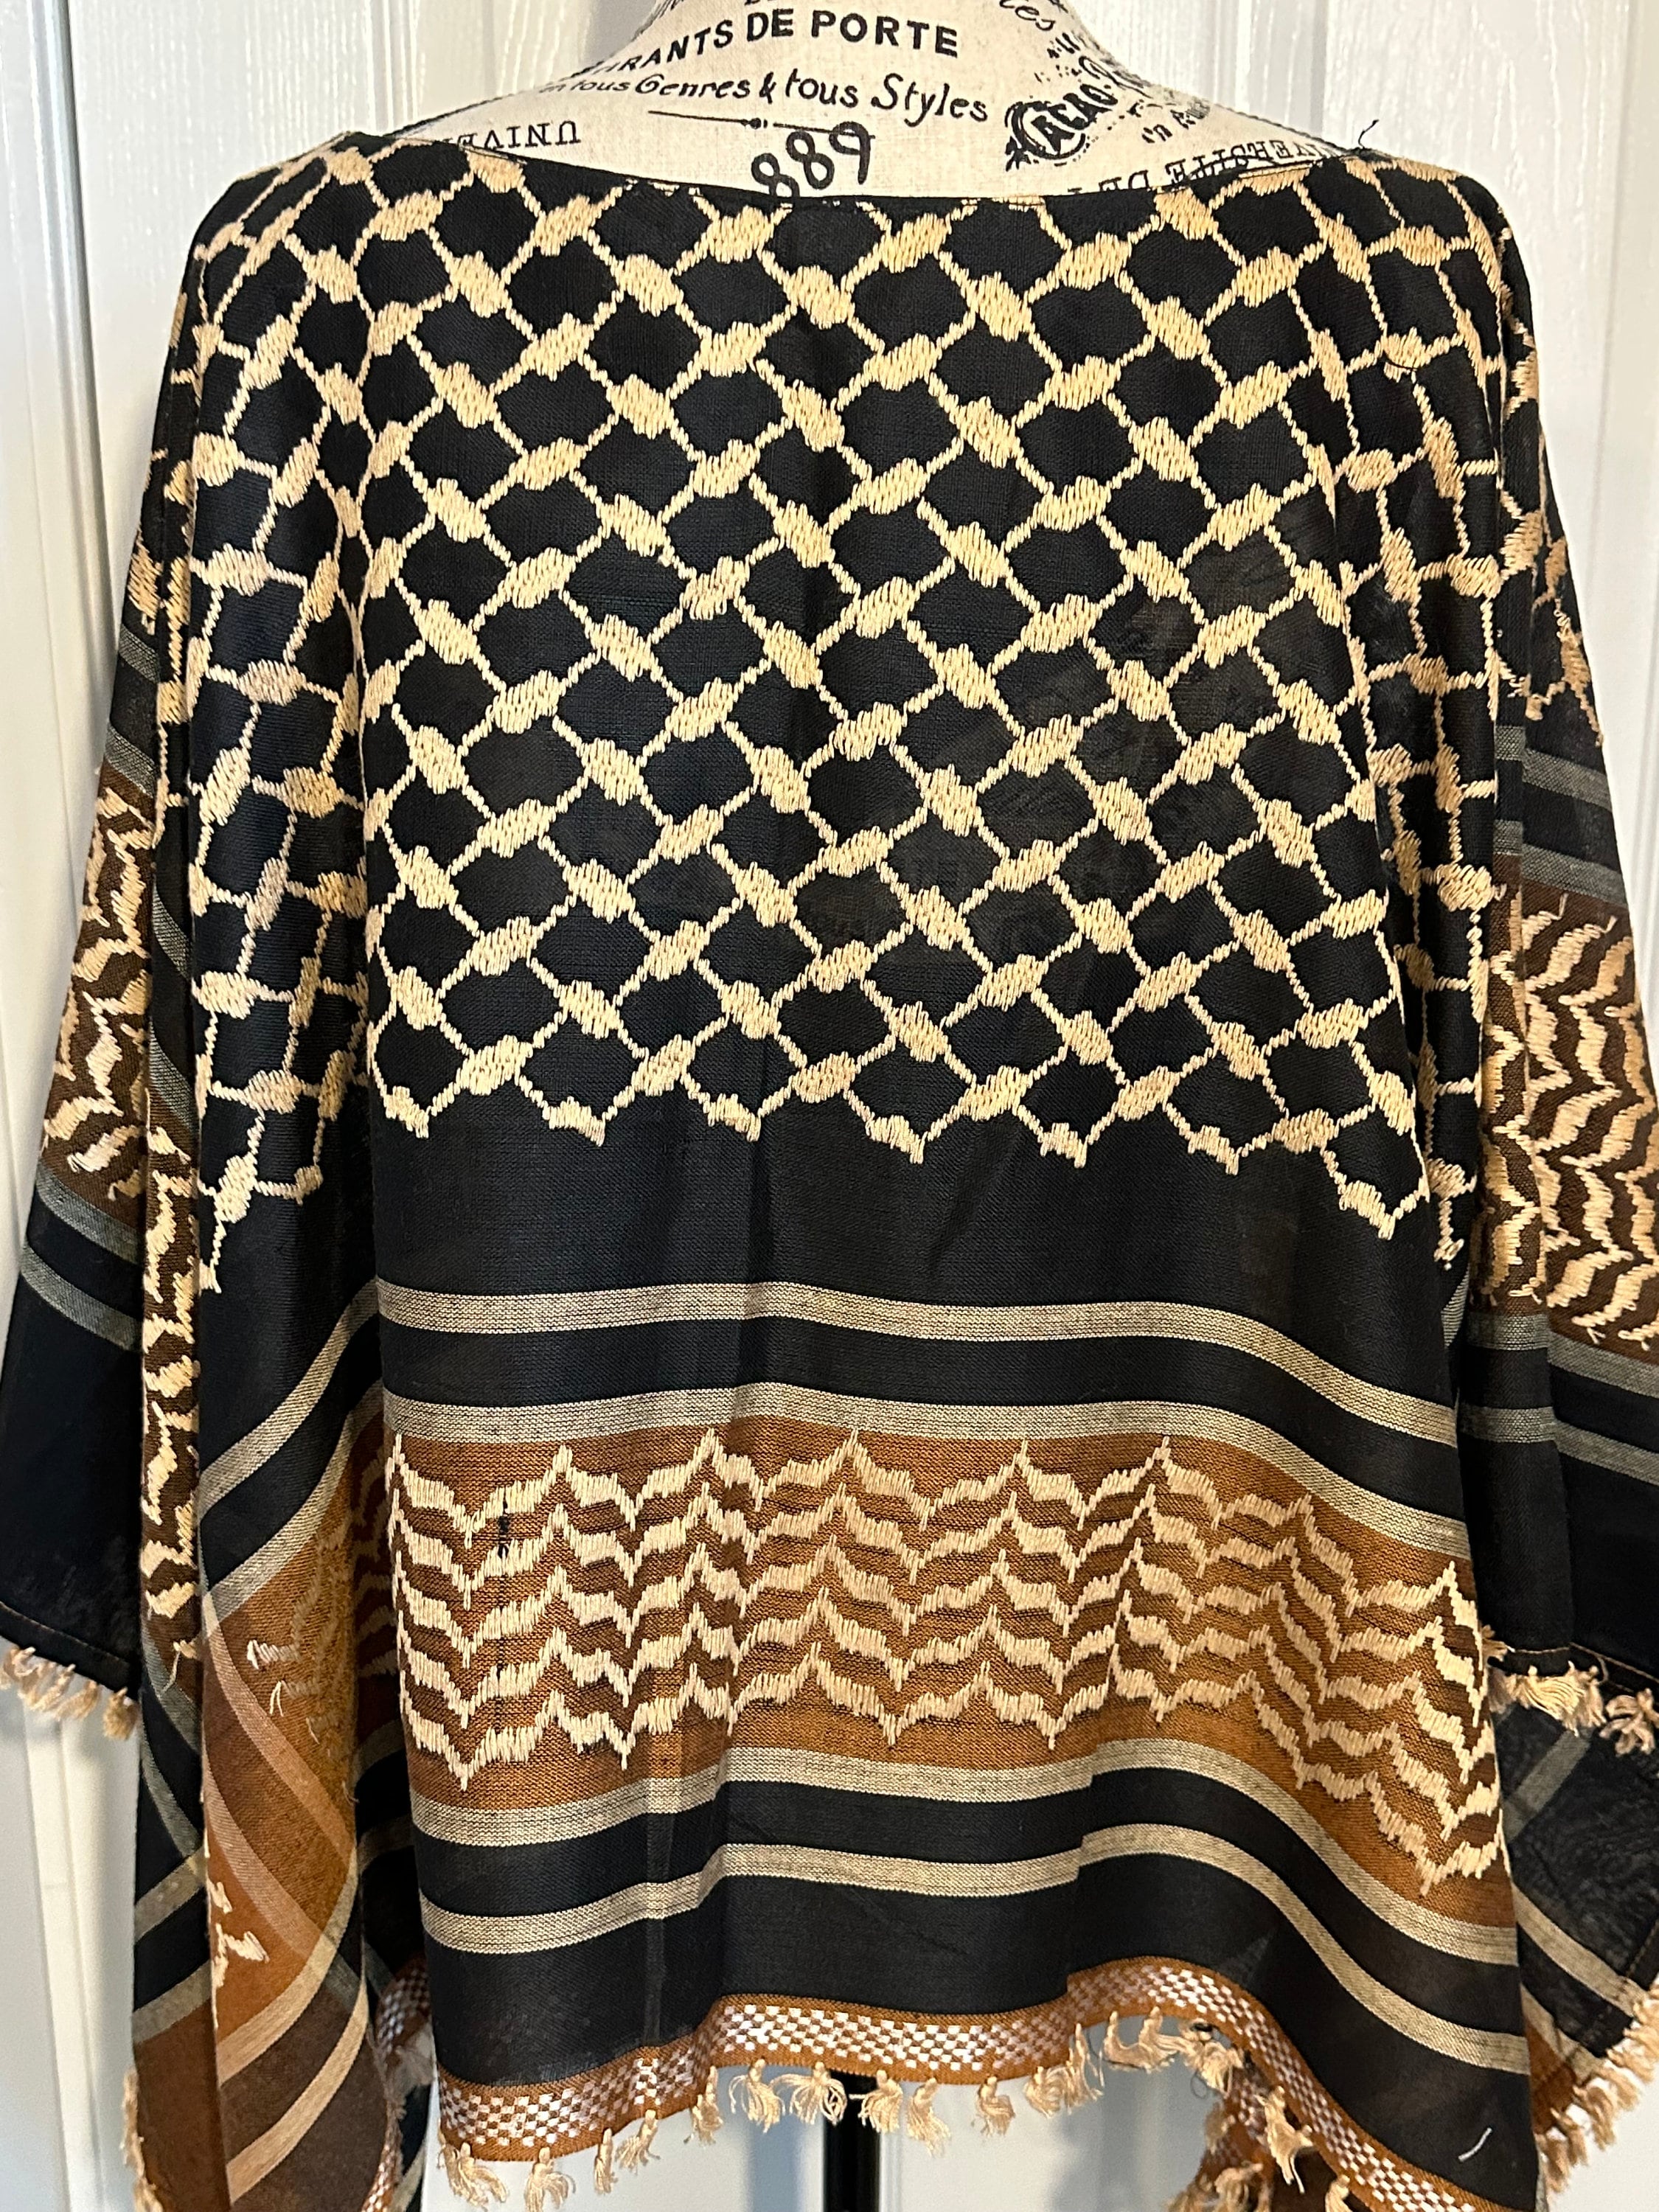 Authentic Keffiyeh Shemagh Poncho Top Cover-up Unique - Etsy